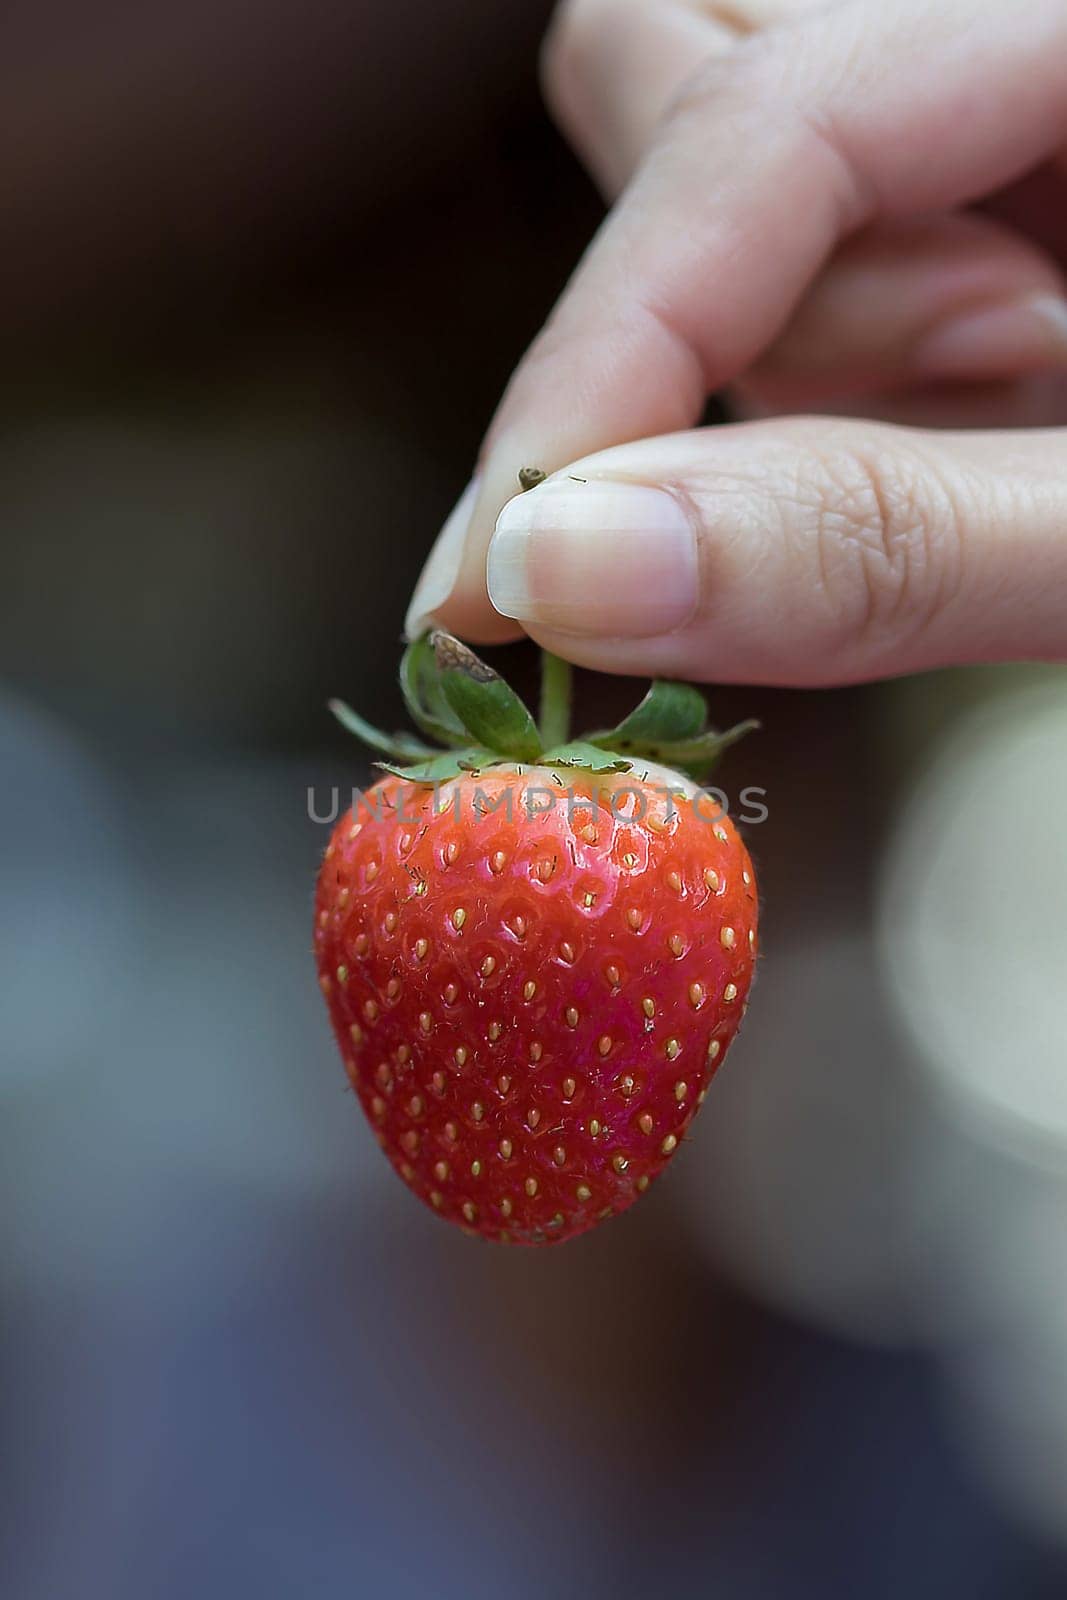 Fingers woman holding a strawberry red berries to eat.